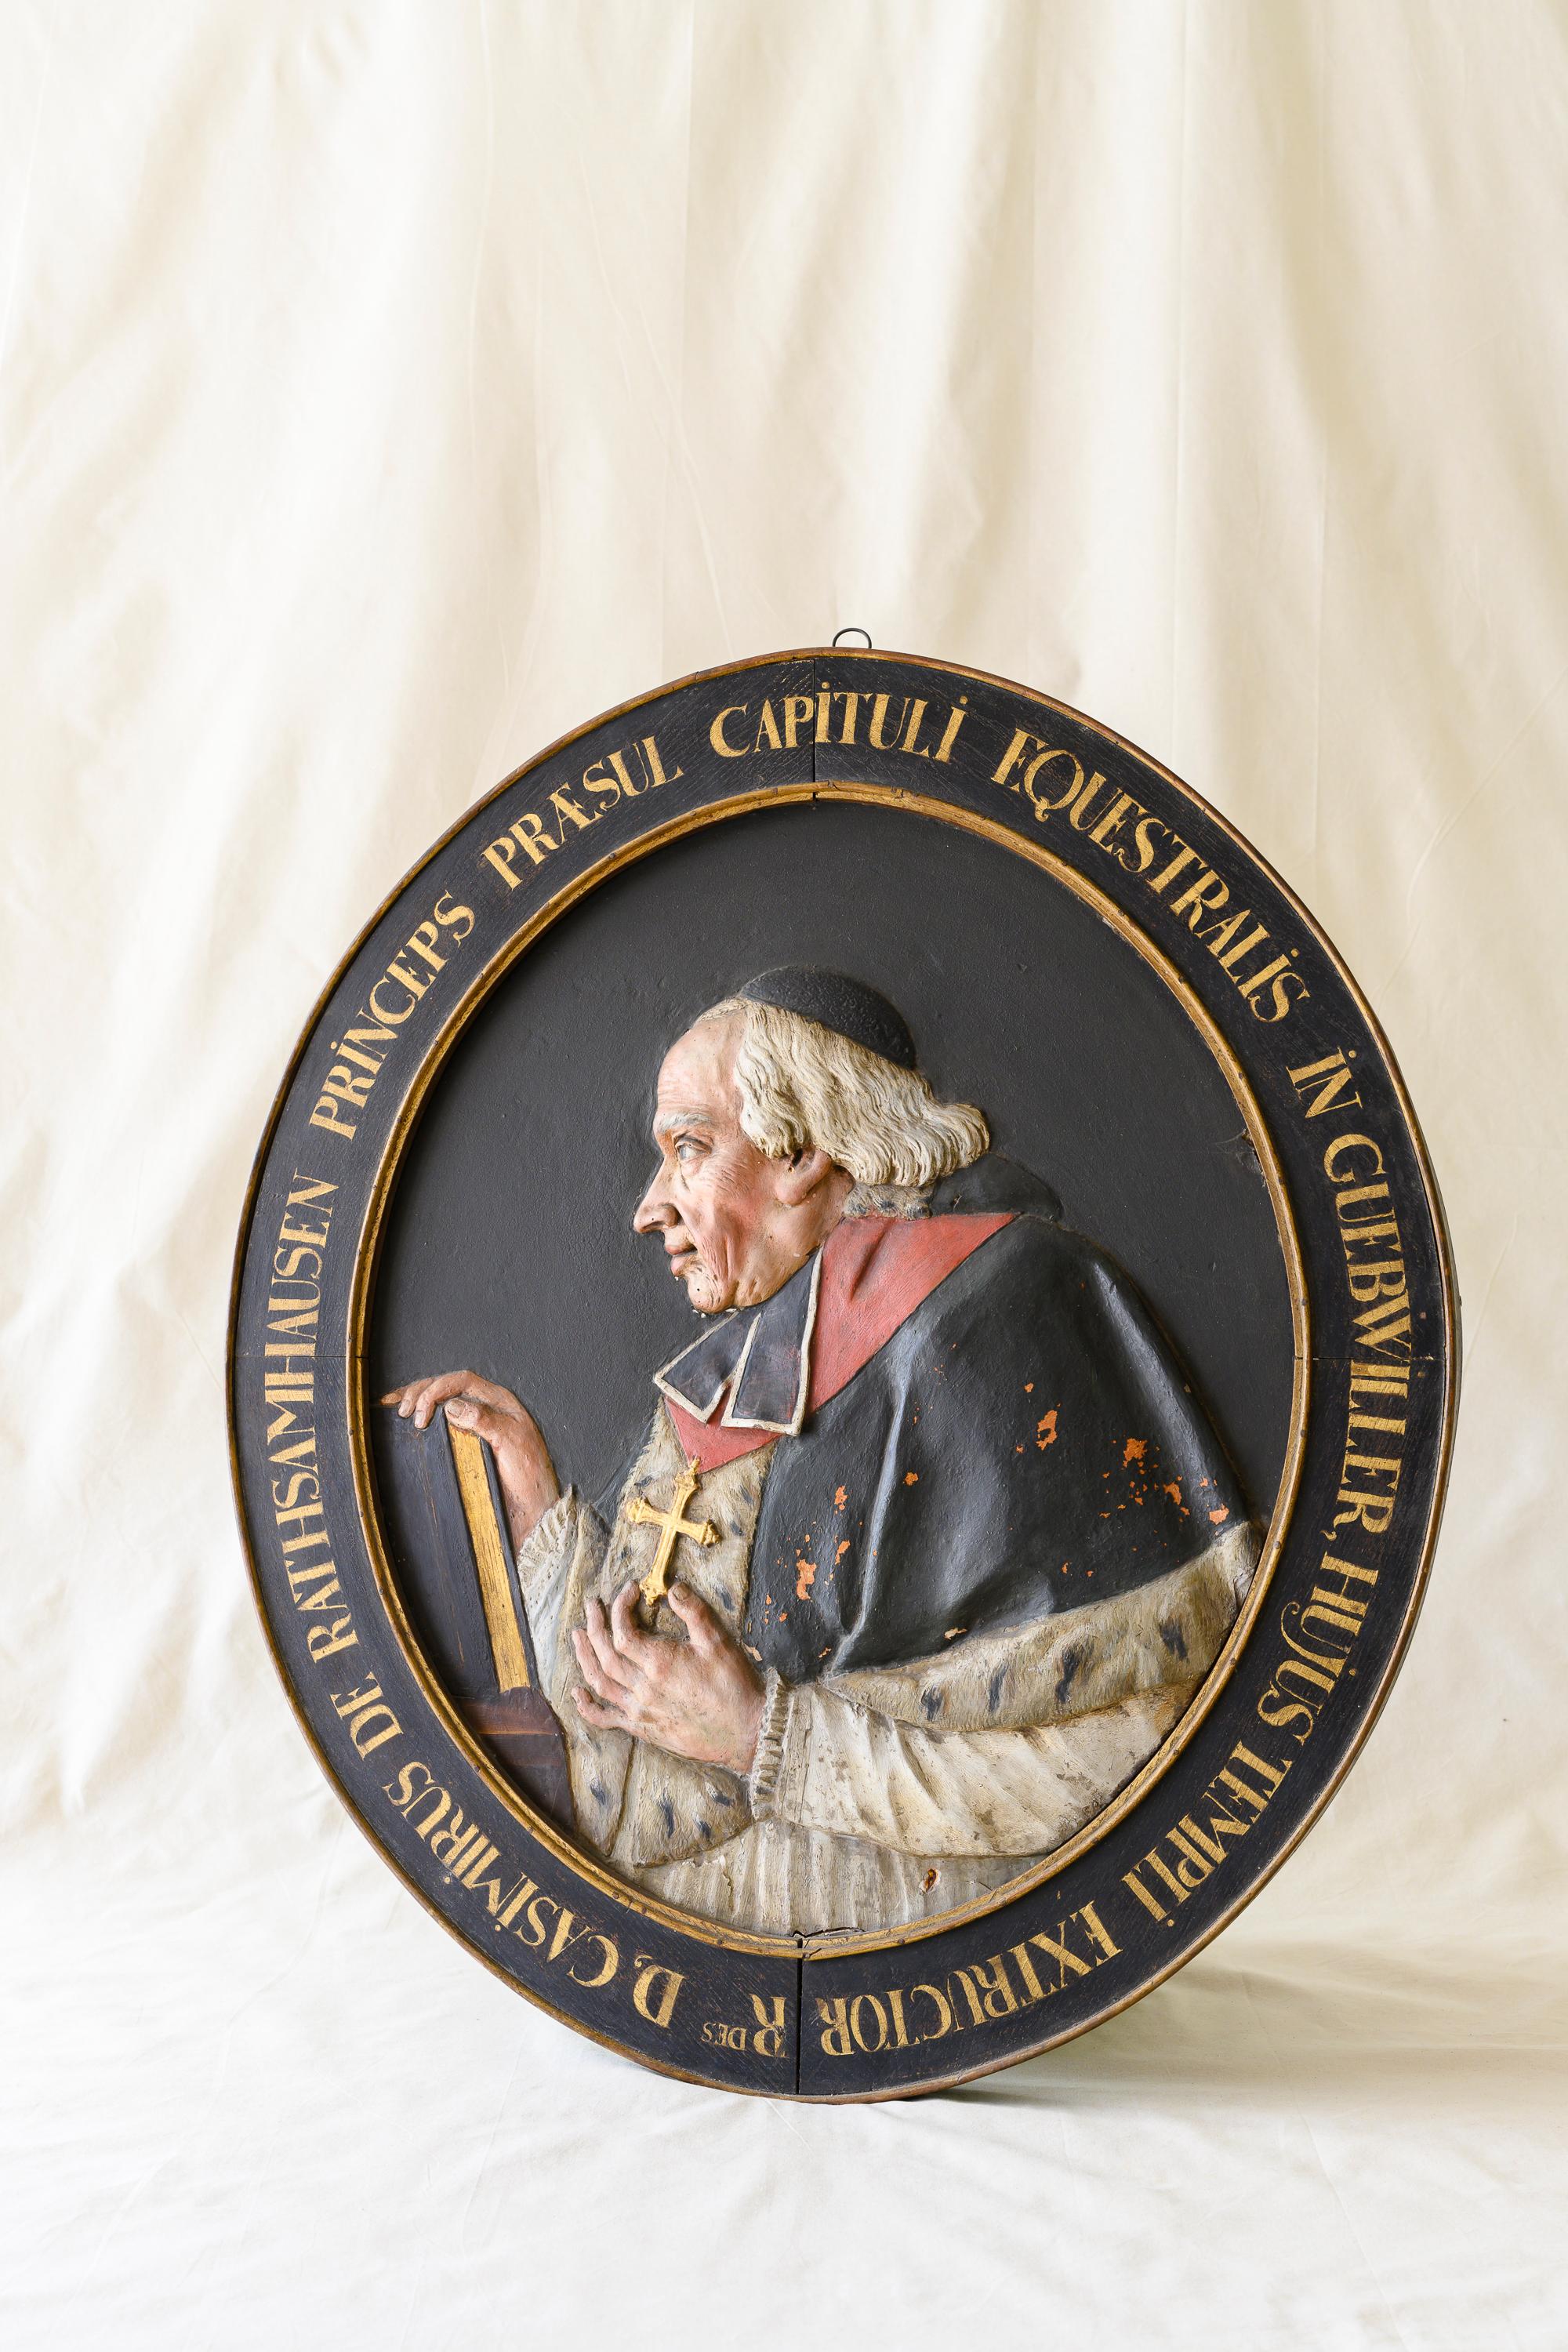 Oval carved wood portrait of Casimir-Frédéric de Rathsamhausen-Wibolsheim (1698-1786). Known as Dom Léger, he was a Catholic cardinal at the Abbey of Murbarch in France's Rhine valley. Carved from a single massive piece of wood, likely oak, with